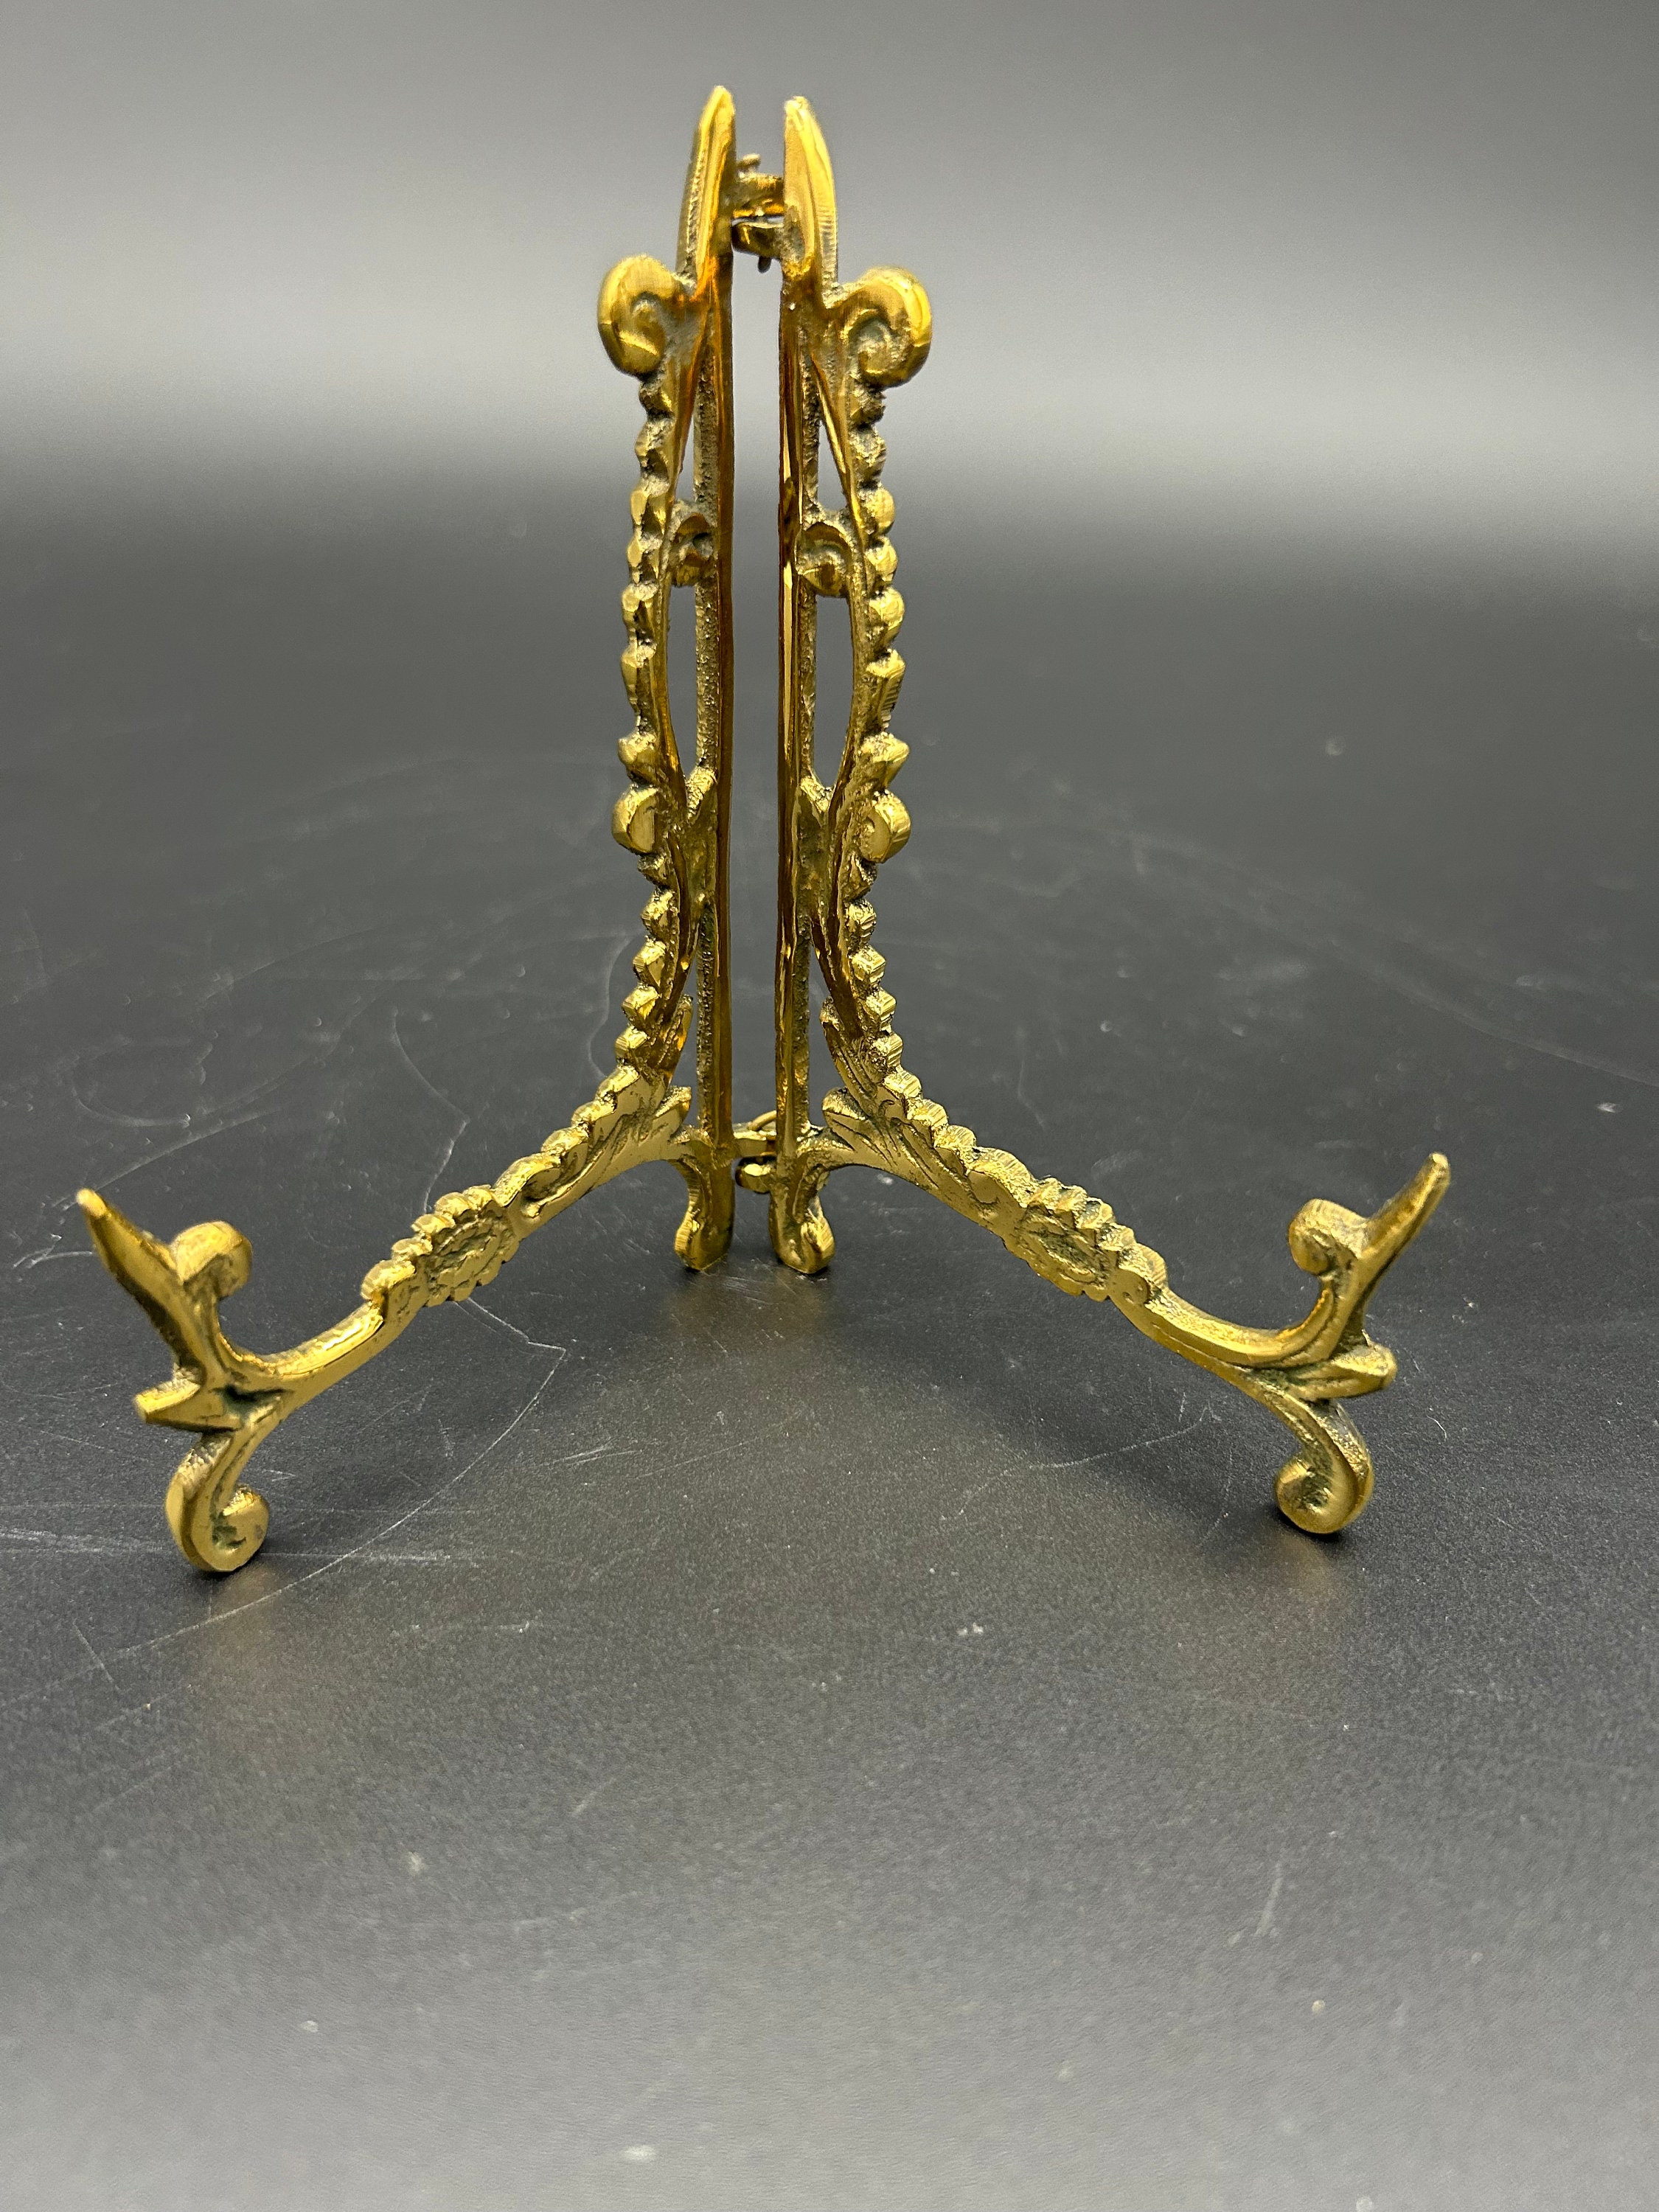 Small Picture Stand - Brass Plated With Bracket